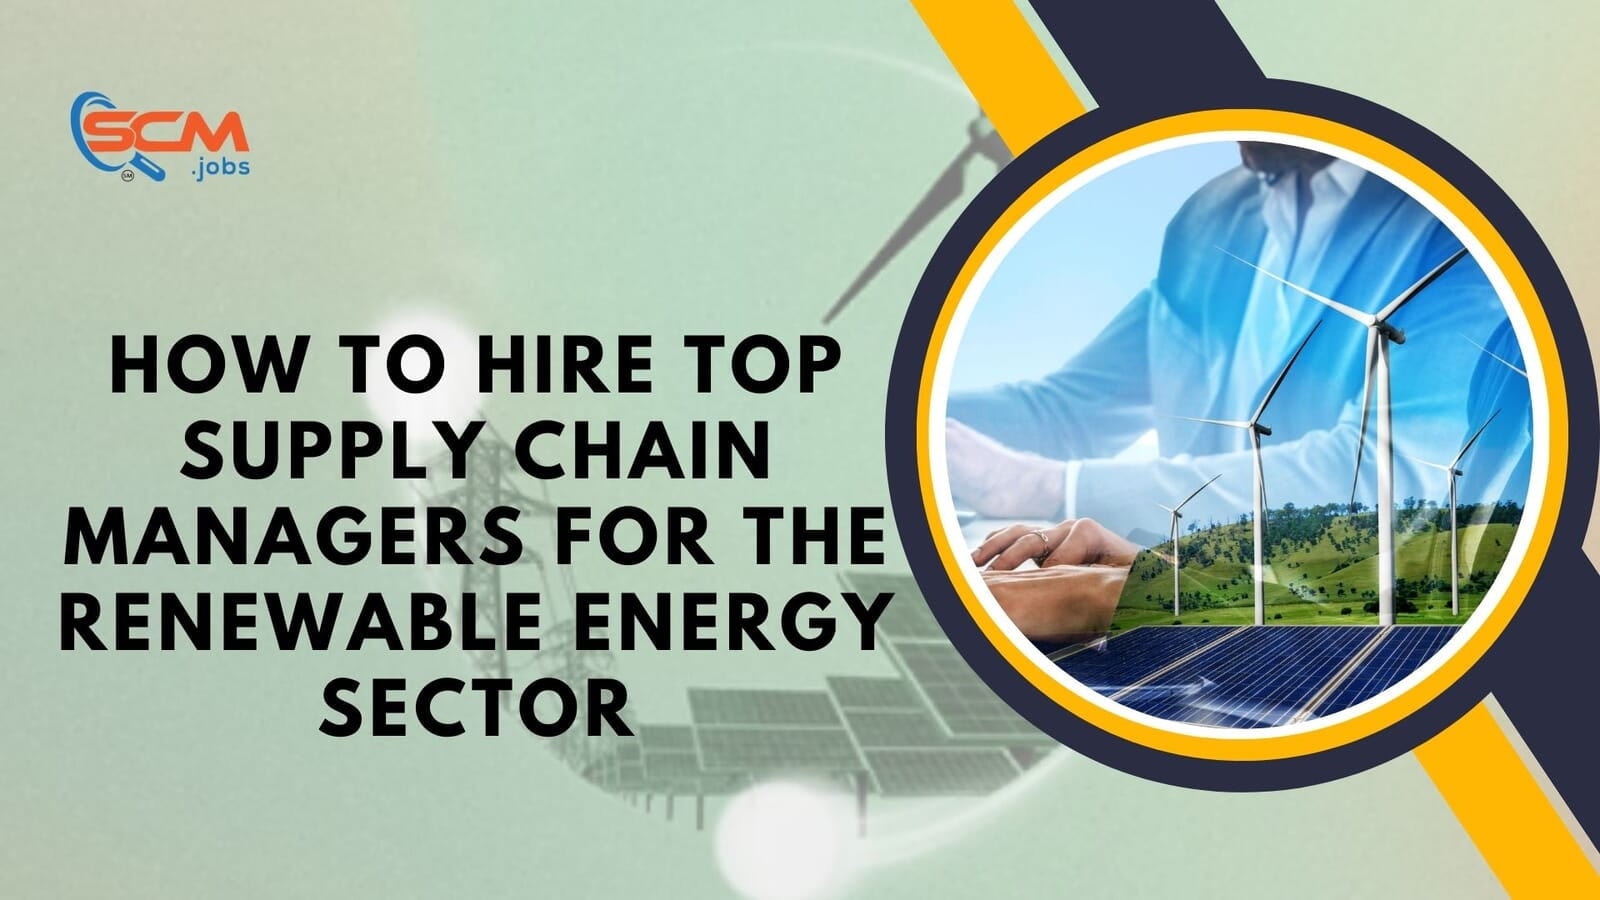 How to Hire Top Supply Chain Managers for the Renewable Energy Sector